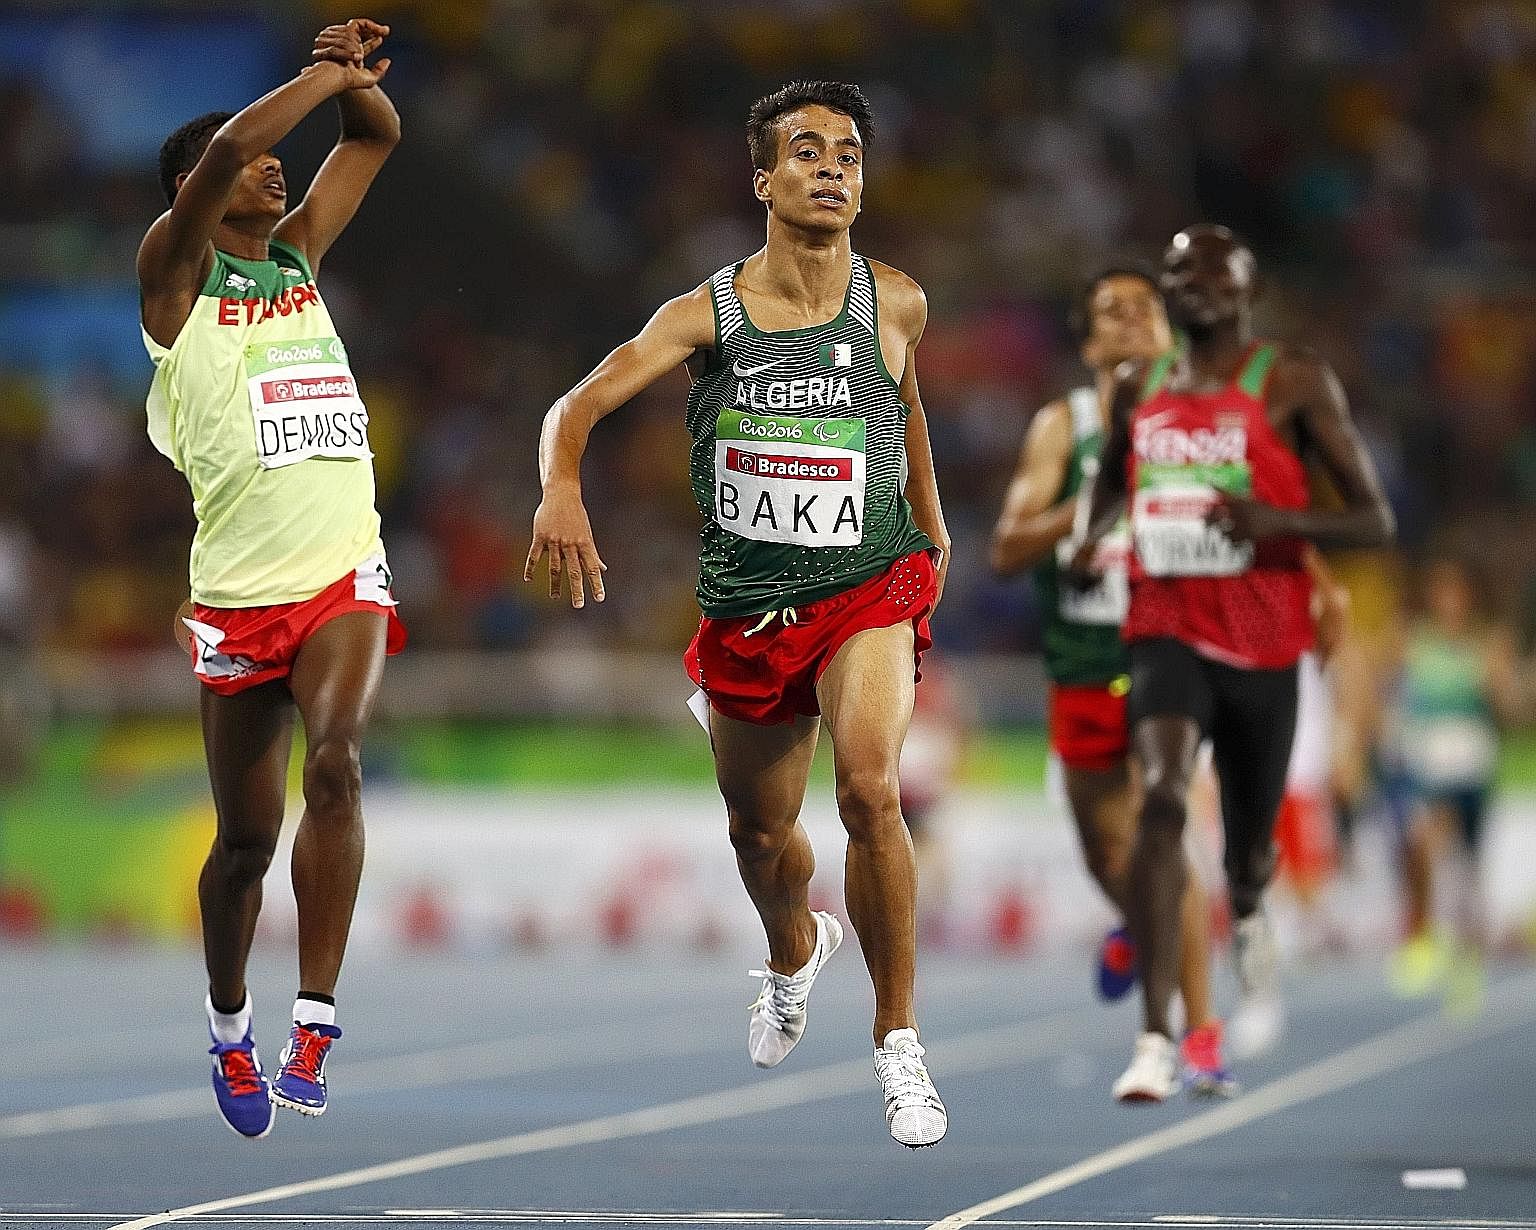 Abdellatif Baka of Algeria (right) won the T13 1,500m in a new Paralympic, Olympic and world record time in Rio de Janeiro, while Tamiru Demisse of Ethiopia took the silver.